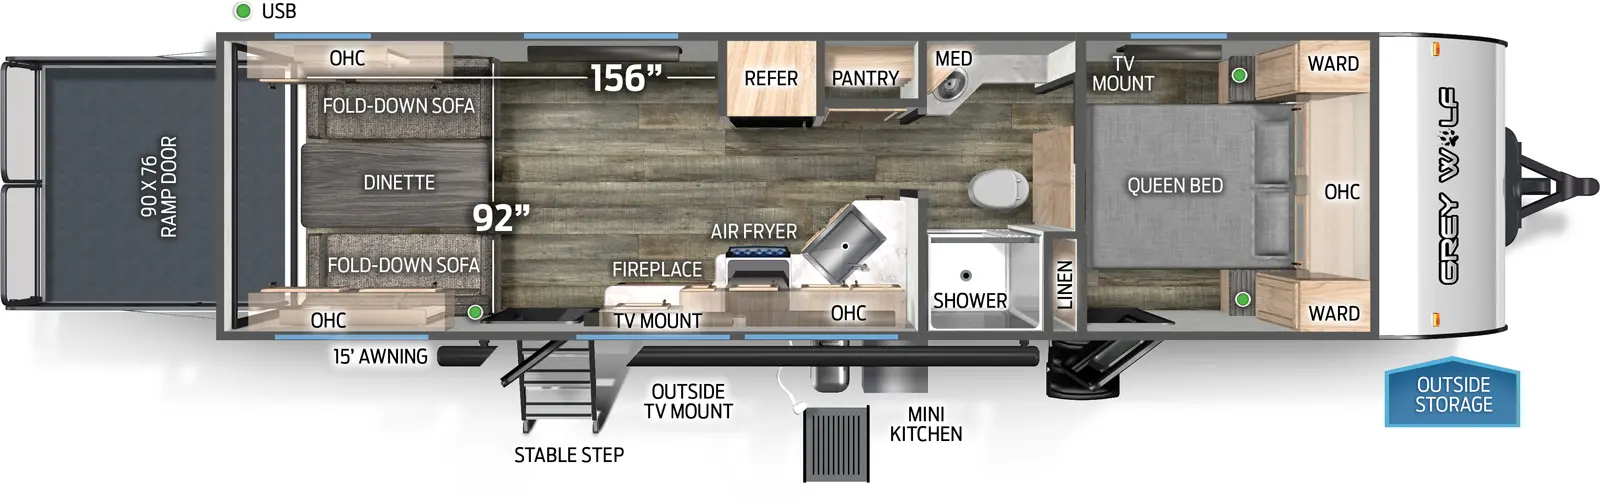 The 24RRT has no slide outs, a rear ramp door, and two entry doors. Exterior features include 15 foot awning, outside TV mount, outside storage, mini kitchen, and stable step on main entry. Interior layout front to back: queen bed with overhead cabinet, wardrobes on either side, off-door side TV mount, door side entry, and linen closet; pass through full bathroom with sink and medicine cabinet on off-door side, and shower and toilet on door side; off-door side pantry and refrigerator; kitchen countertop with sink wraps from inner wall to door side with overhead cabinet, air fryer, fireplace with TV mount above, and main entry; rear opposing wall fold down sofas with overhead cabinets, and dinette table. Cargo area measurements: 156 inches from the rear of the trailer to the refrigerator; 92 inches from off-door side wall to door side wall; 90 inch by 76 inch rear ramp door.